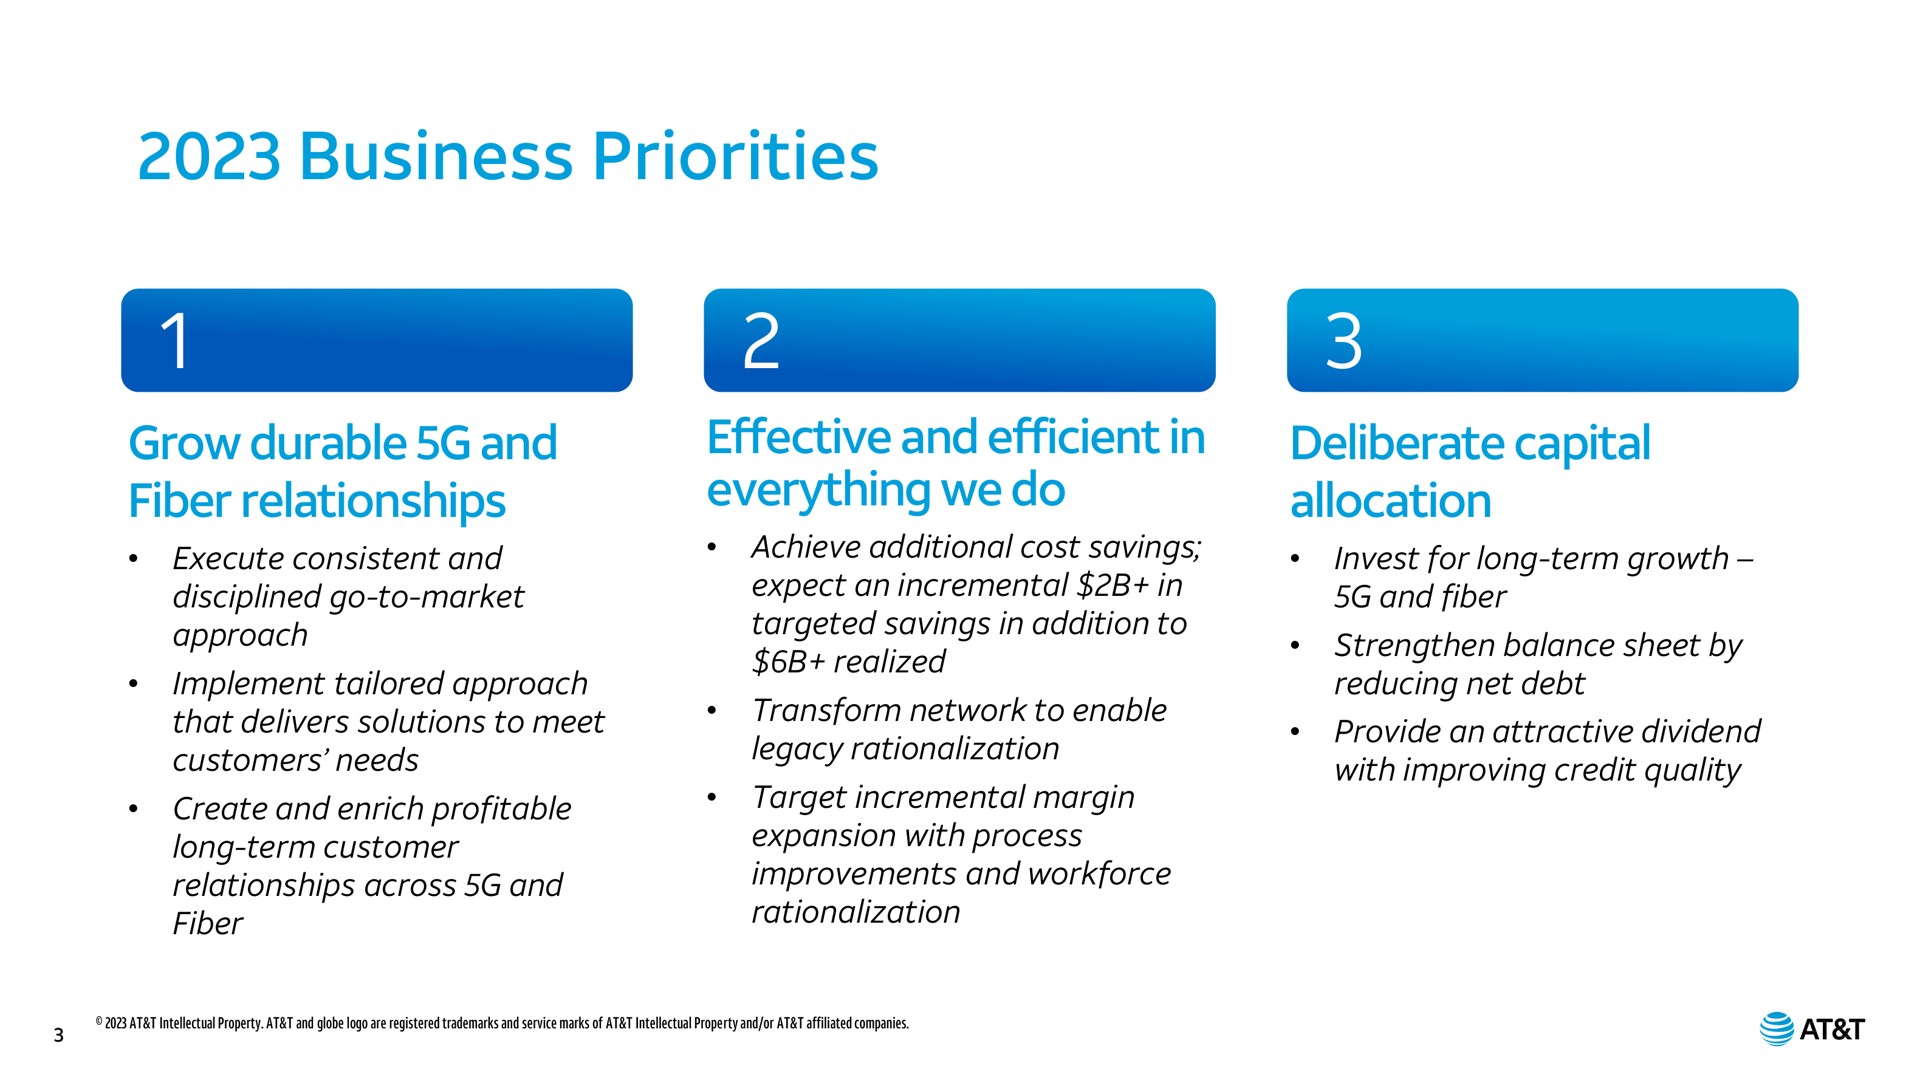 business priorities grow durable and fiber relationships effective and efficient in everything we do deliberate capital allocation consistent disciplined go to market approach implement tailored approach that delivers solutions to meet customers needs create enrich profitable long term customer across achieve additional cost savings expect an incremental targeted savings addition to realized transform network to enable legacy rationalization target incremental margin expansion with process improvements rationalization invest for long term growth strengthen balance sheet by reducing net debt with improving credit quality at | AT&T